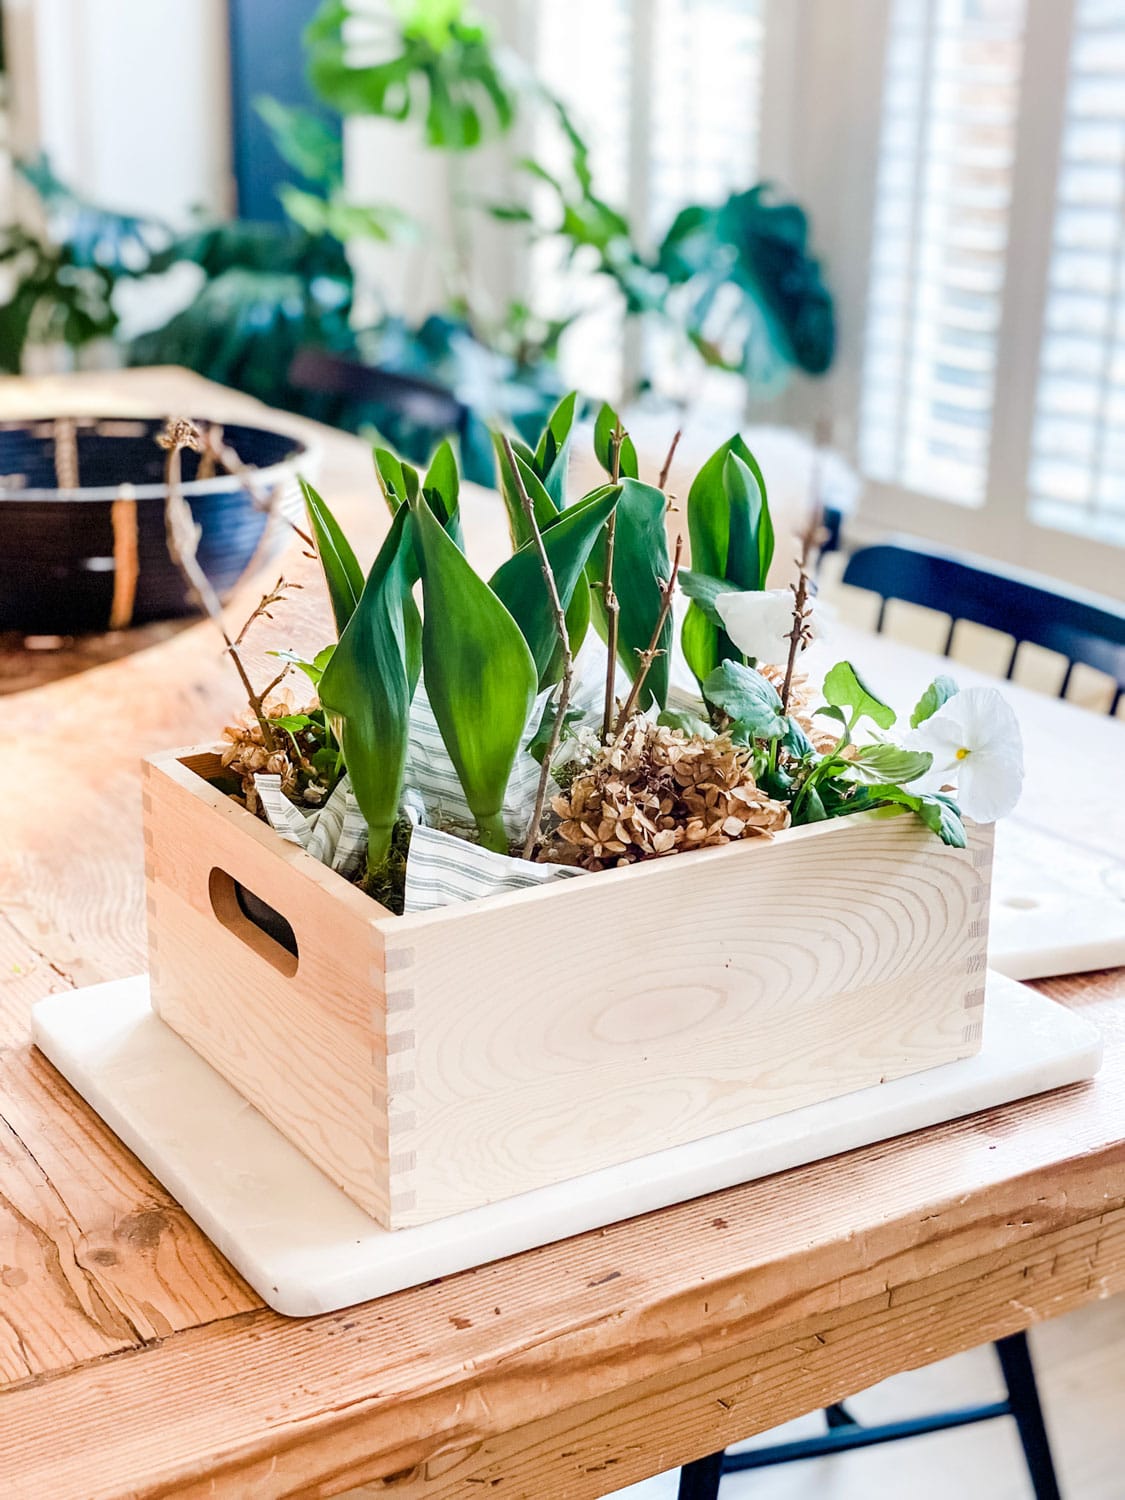 Make an easy indoor spring planter box with simple supplies